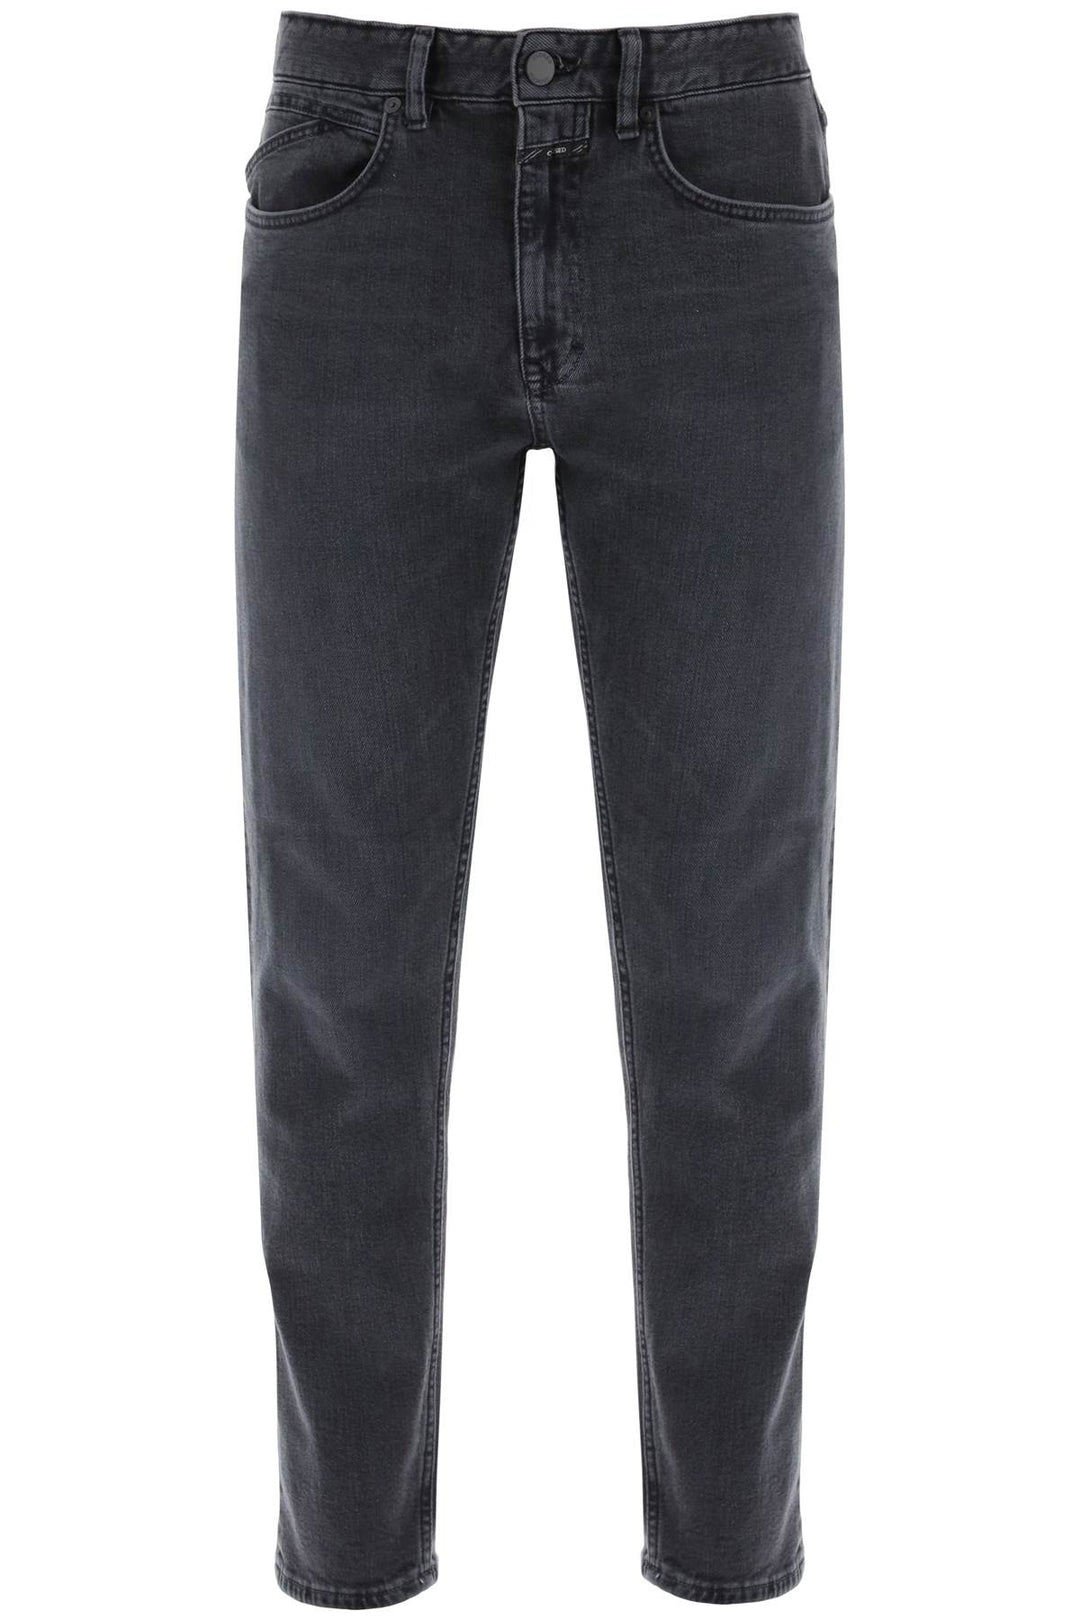 Closed Cooper Jeans With Tapered Cut   Grigio